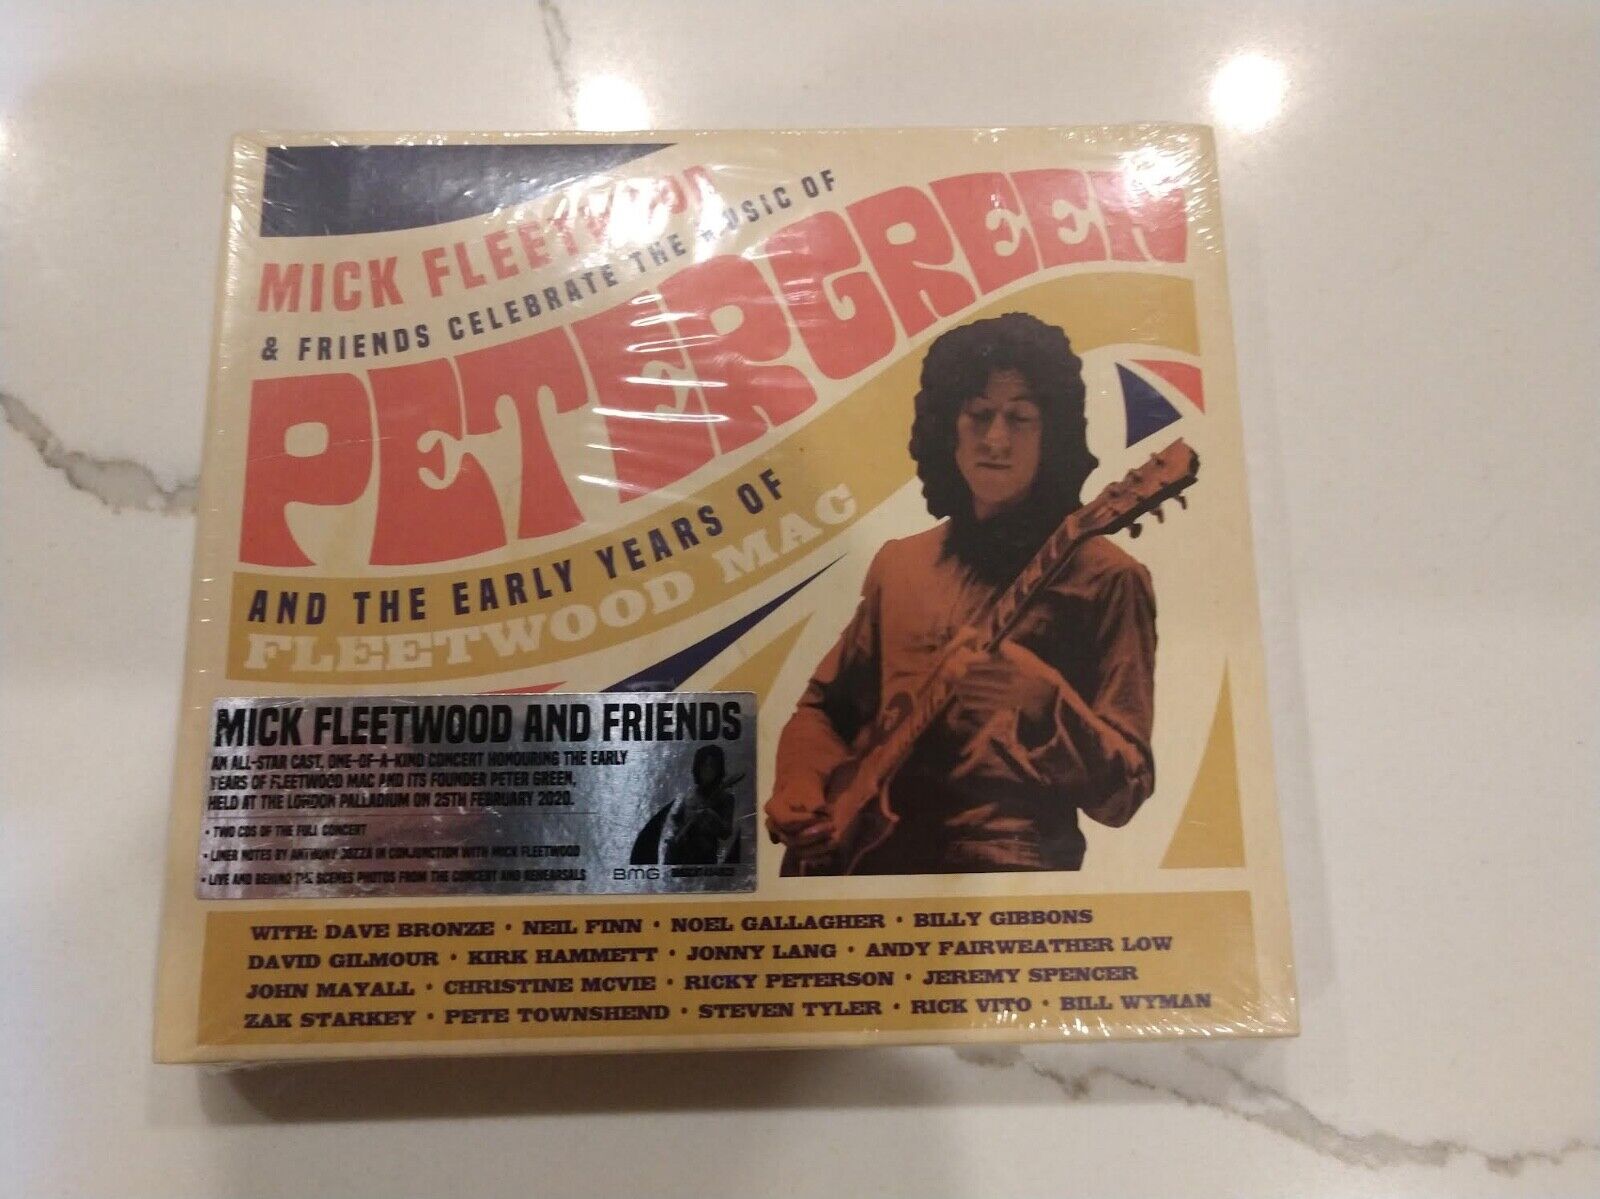 Mick Fleetwood & Friends  Tribute To Peter Green  2 CD Set  New-Sealed Mint